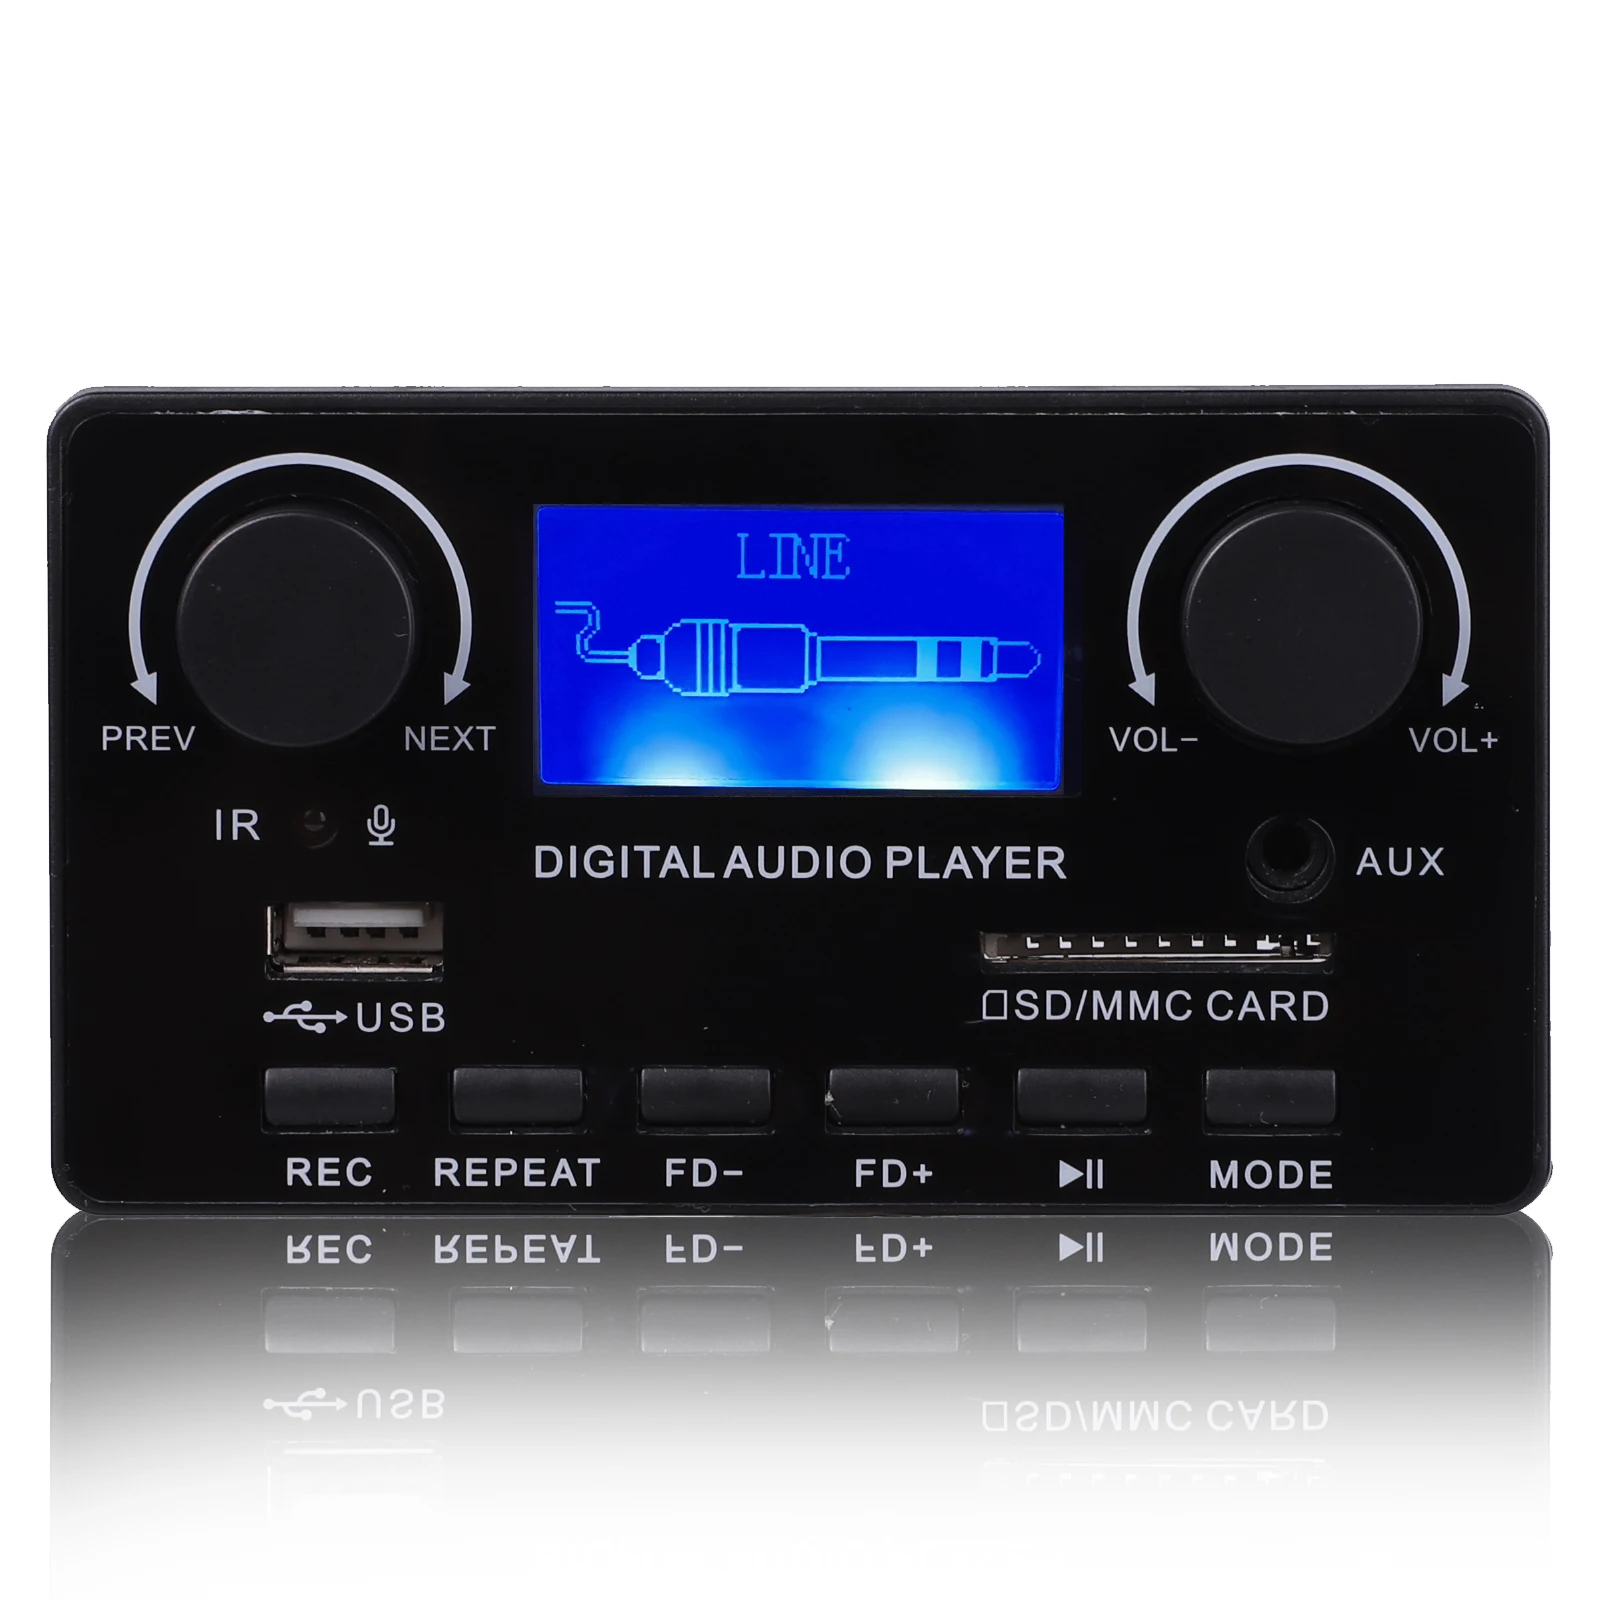 12V Bluetooth 5.0 MP3 Decoder Board Wireless MP3 Player Audio Player FM Radio Module With LCD Display Call Recording TF USB AUX